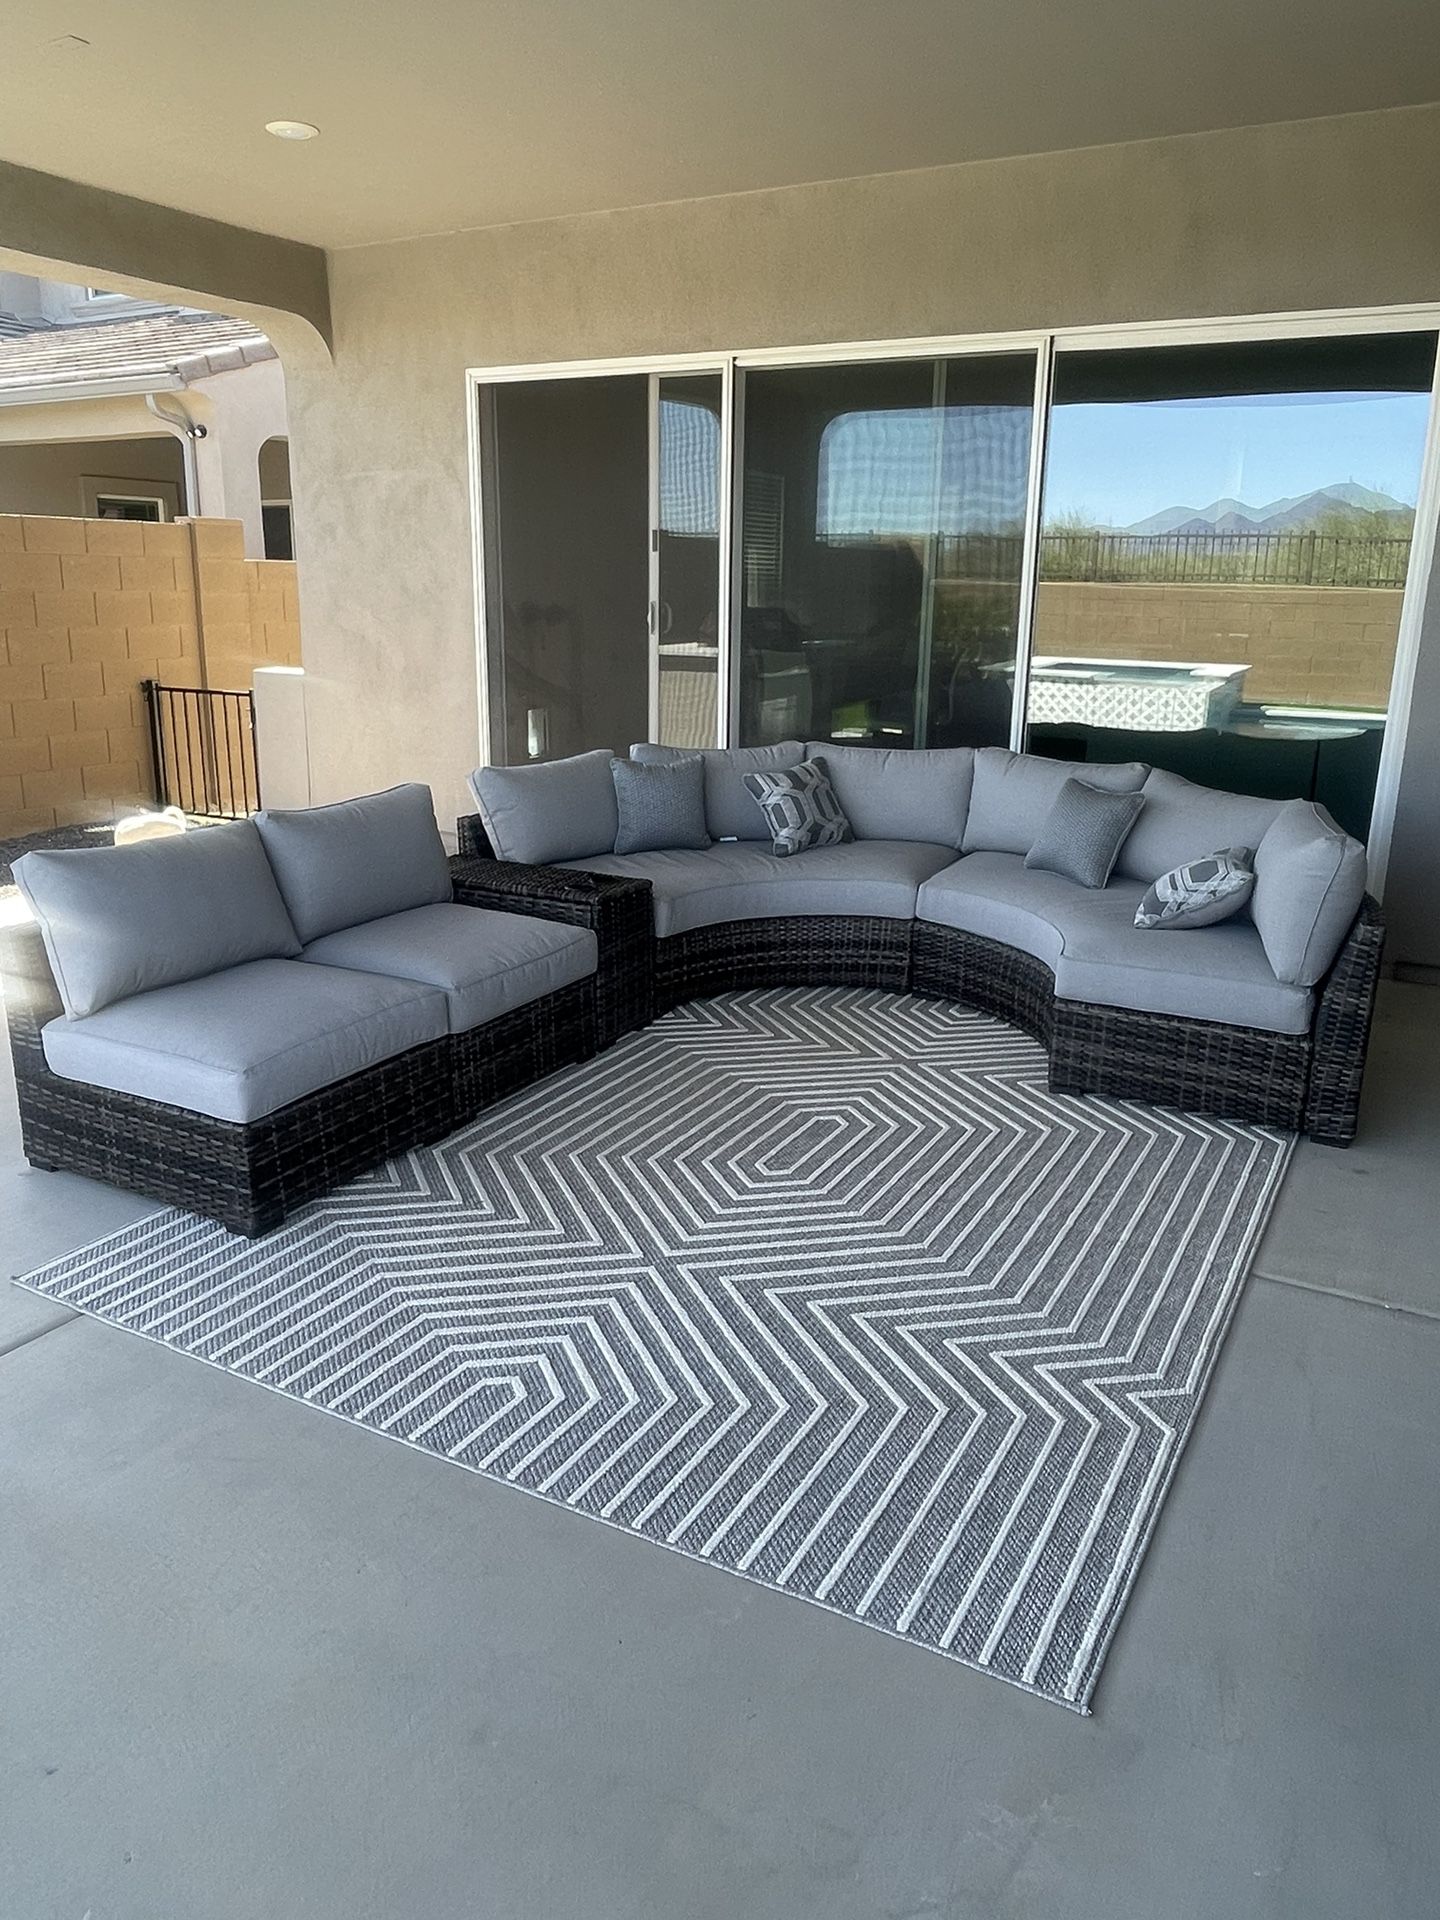 BRAND NEW Outdoor All Weather Patio Furniture